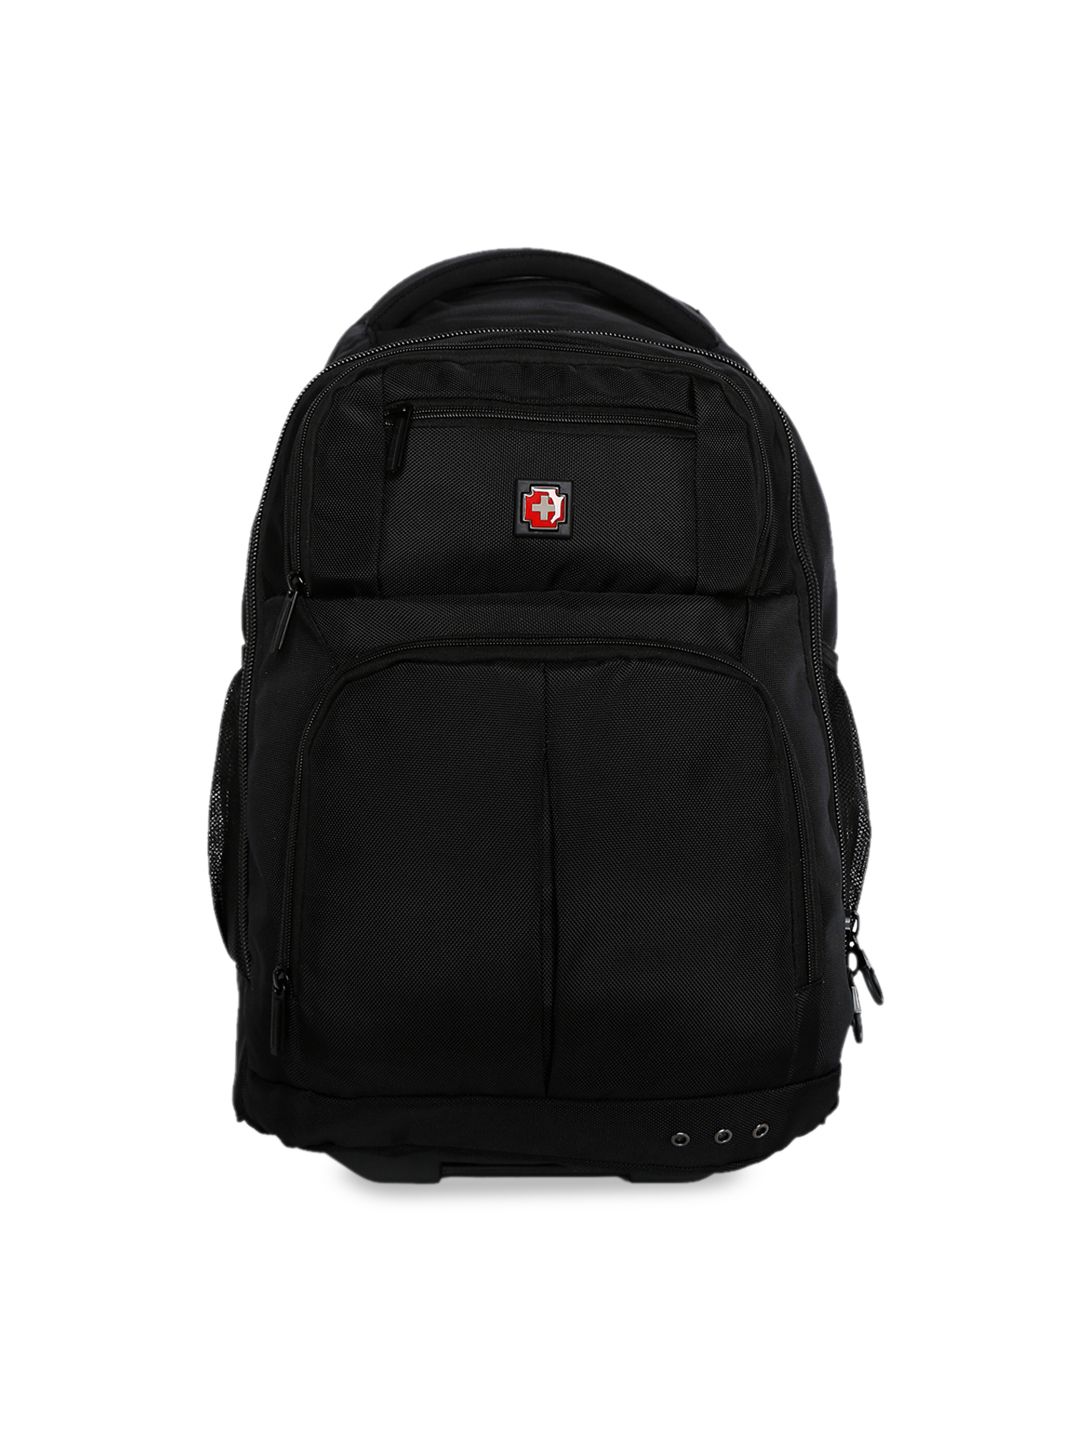 SWISS BRAND Unisex Black Solid Wembley Range Backpack Price in India